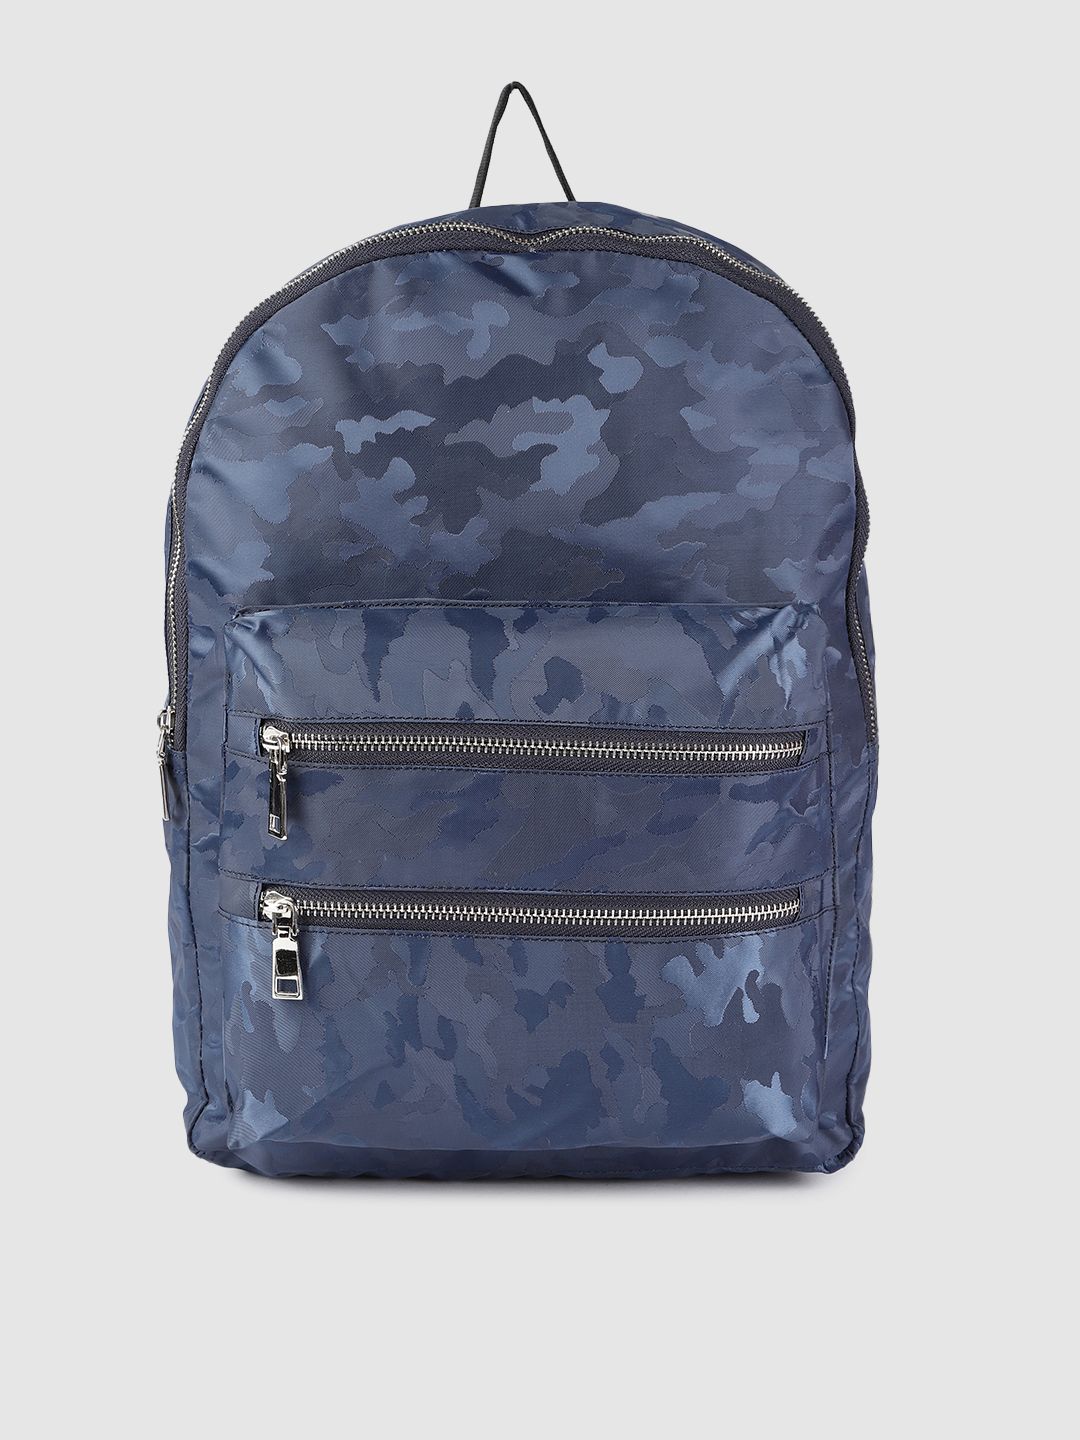 DressBerry Women Blue Camouflage Backpack Price in India